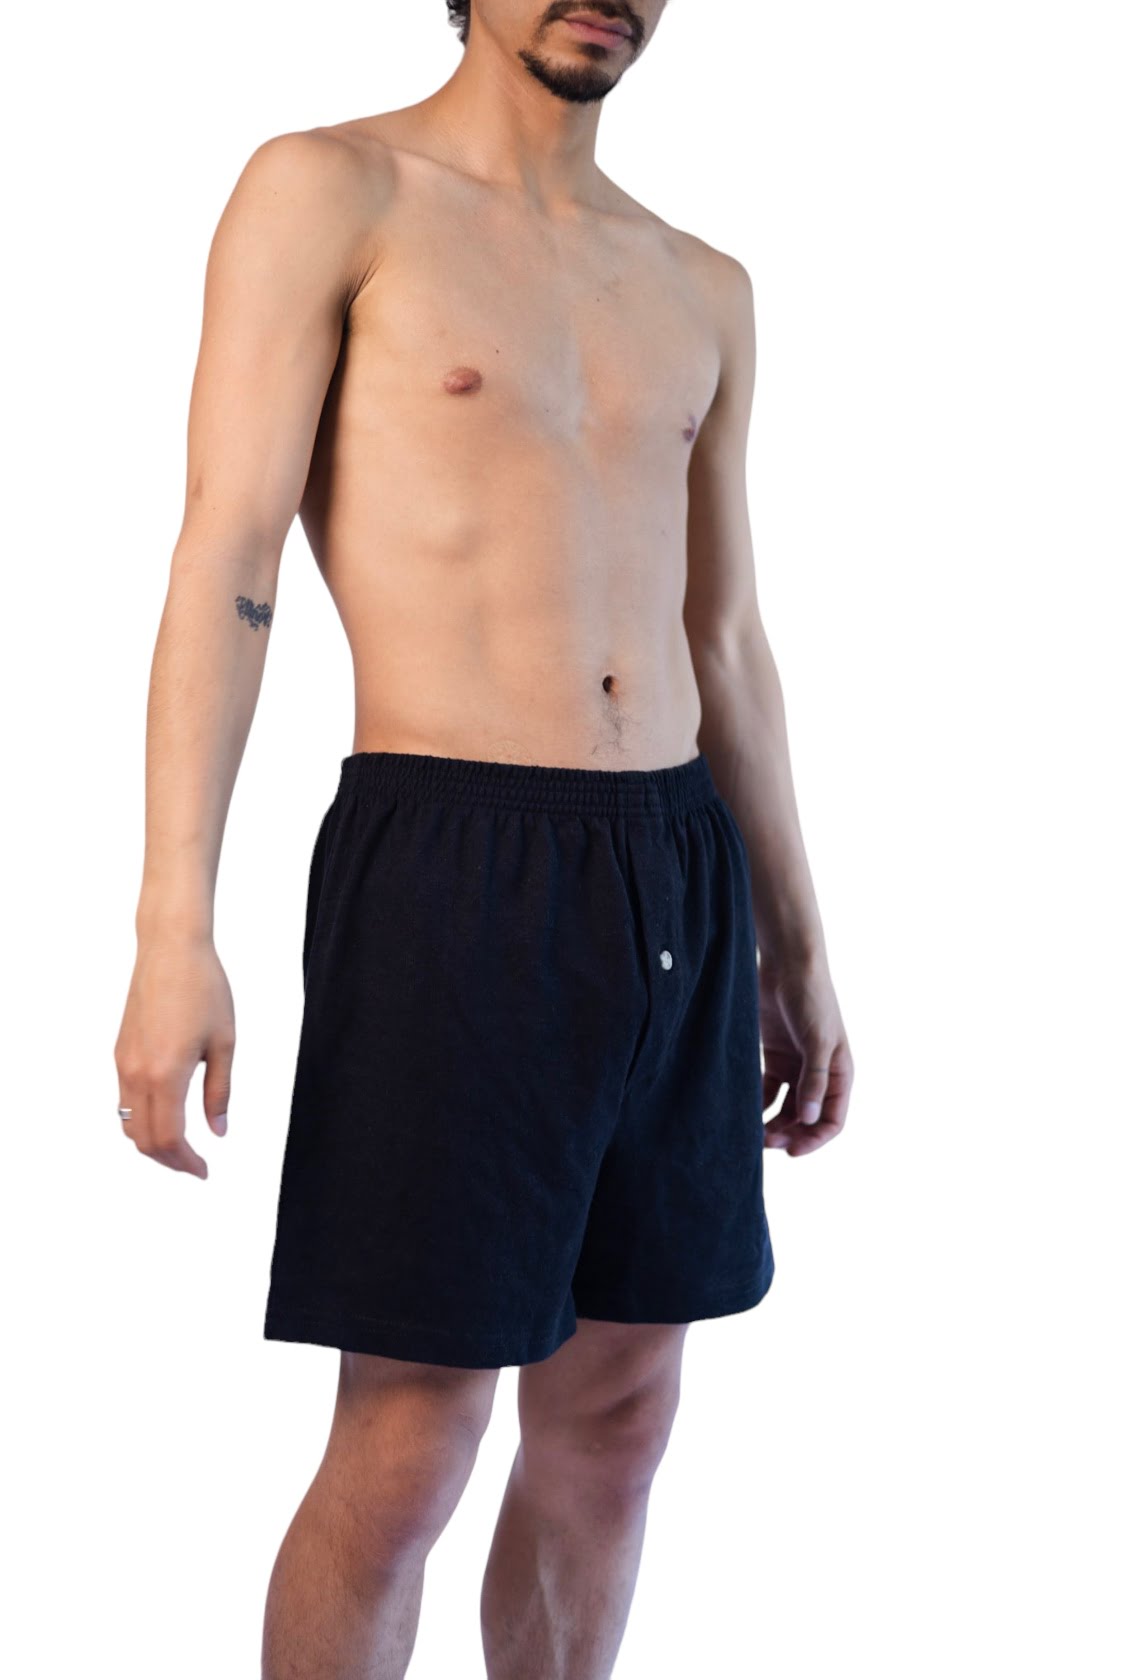 Hemp and Organic Cotton Button Fly Boxers by Asatre